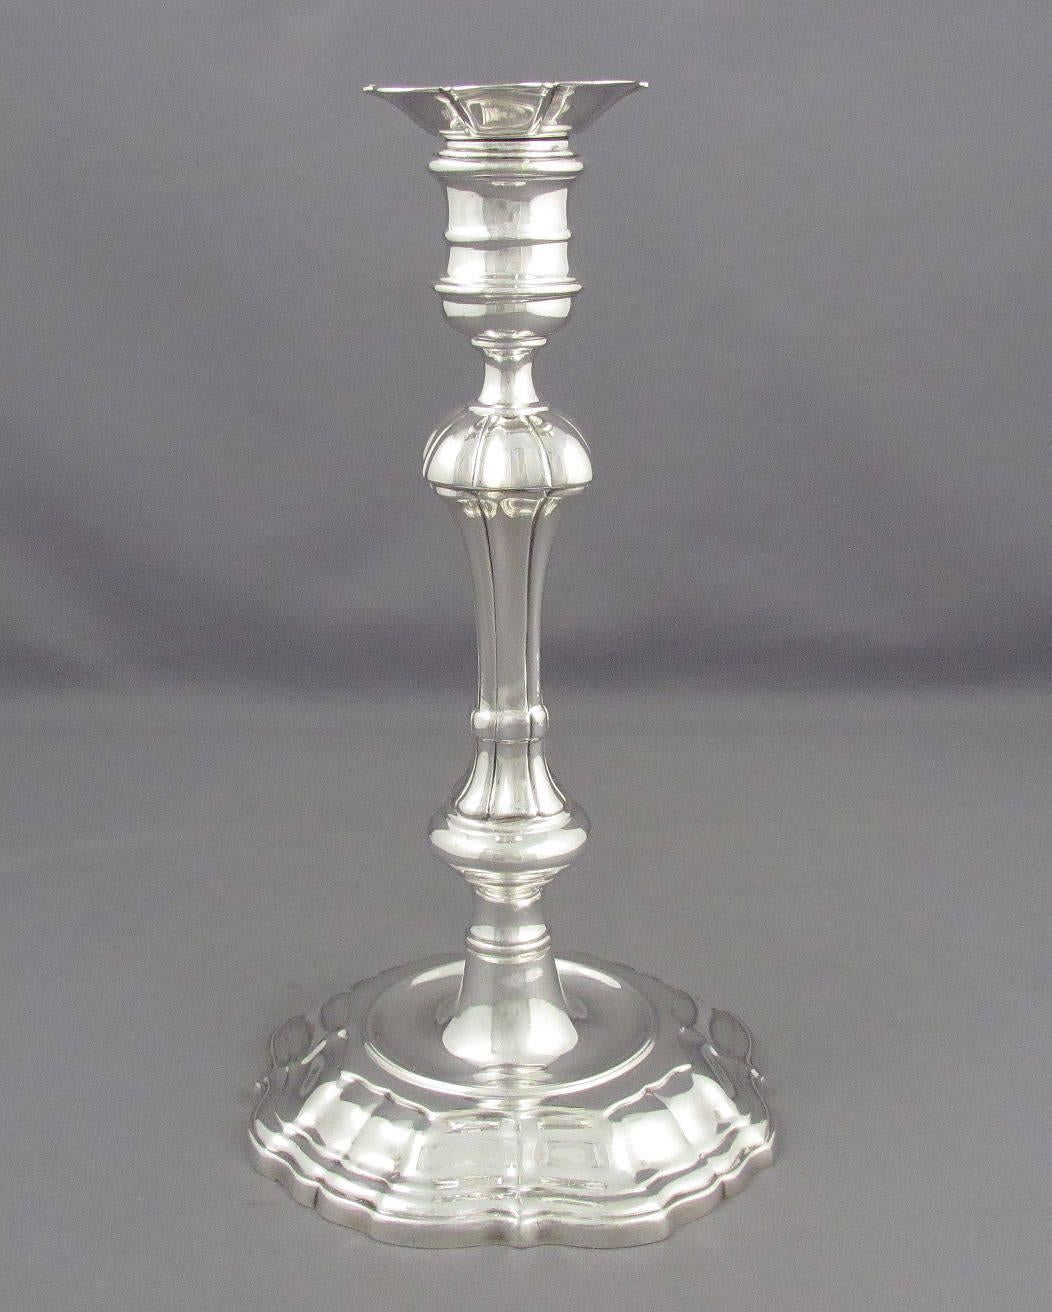 A set of four sterling silver candlesticks by Tiffany & Co., New York 1947-1956. In the George II style, after originals by David Willaume, Fine quality cast construction, removable nozzles. 9" (23cm) high, 63.4 ozt (1971g).